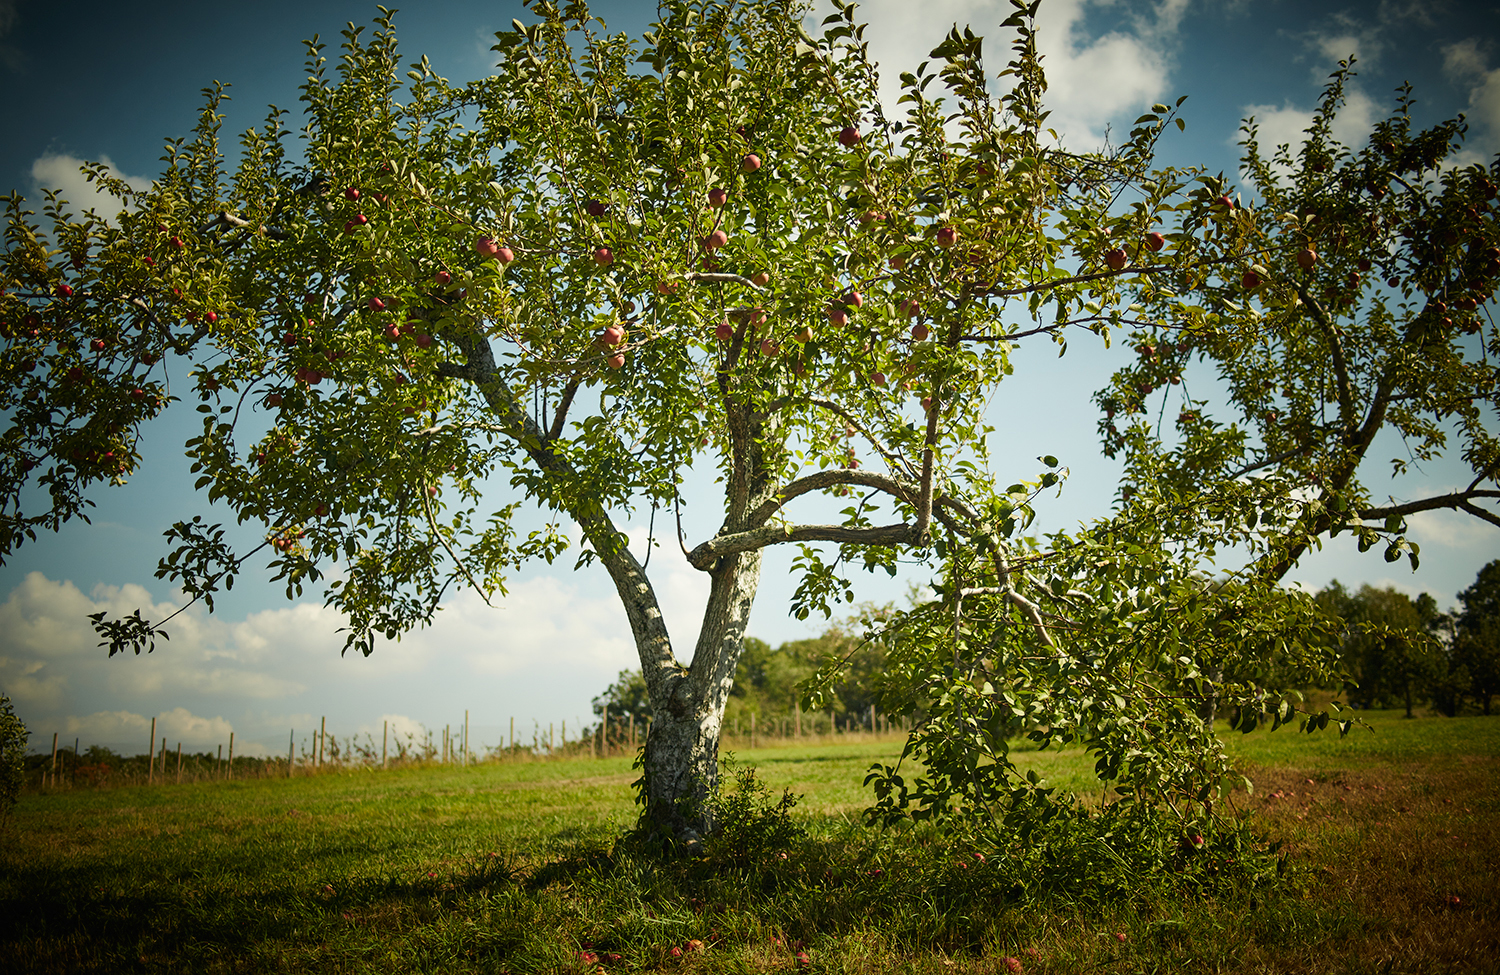 091915_Apple_Picking_OuthouseOrchards_432.jpg